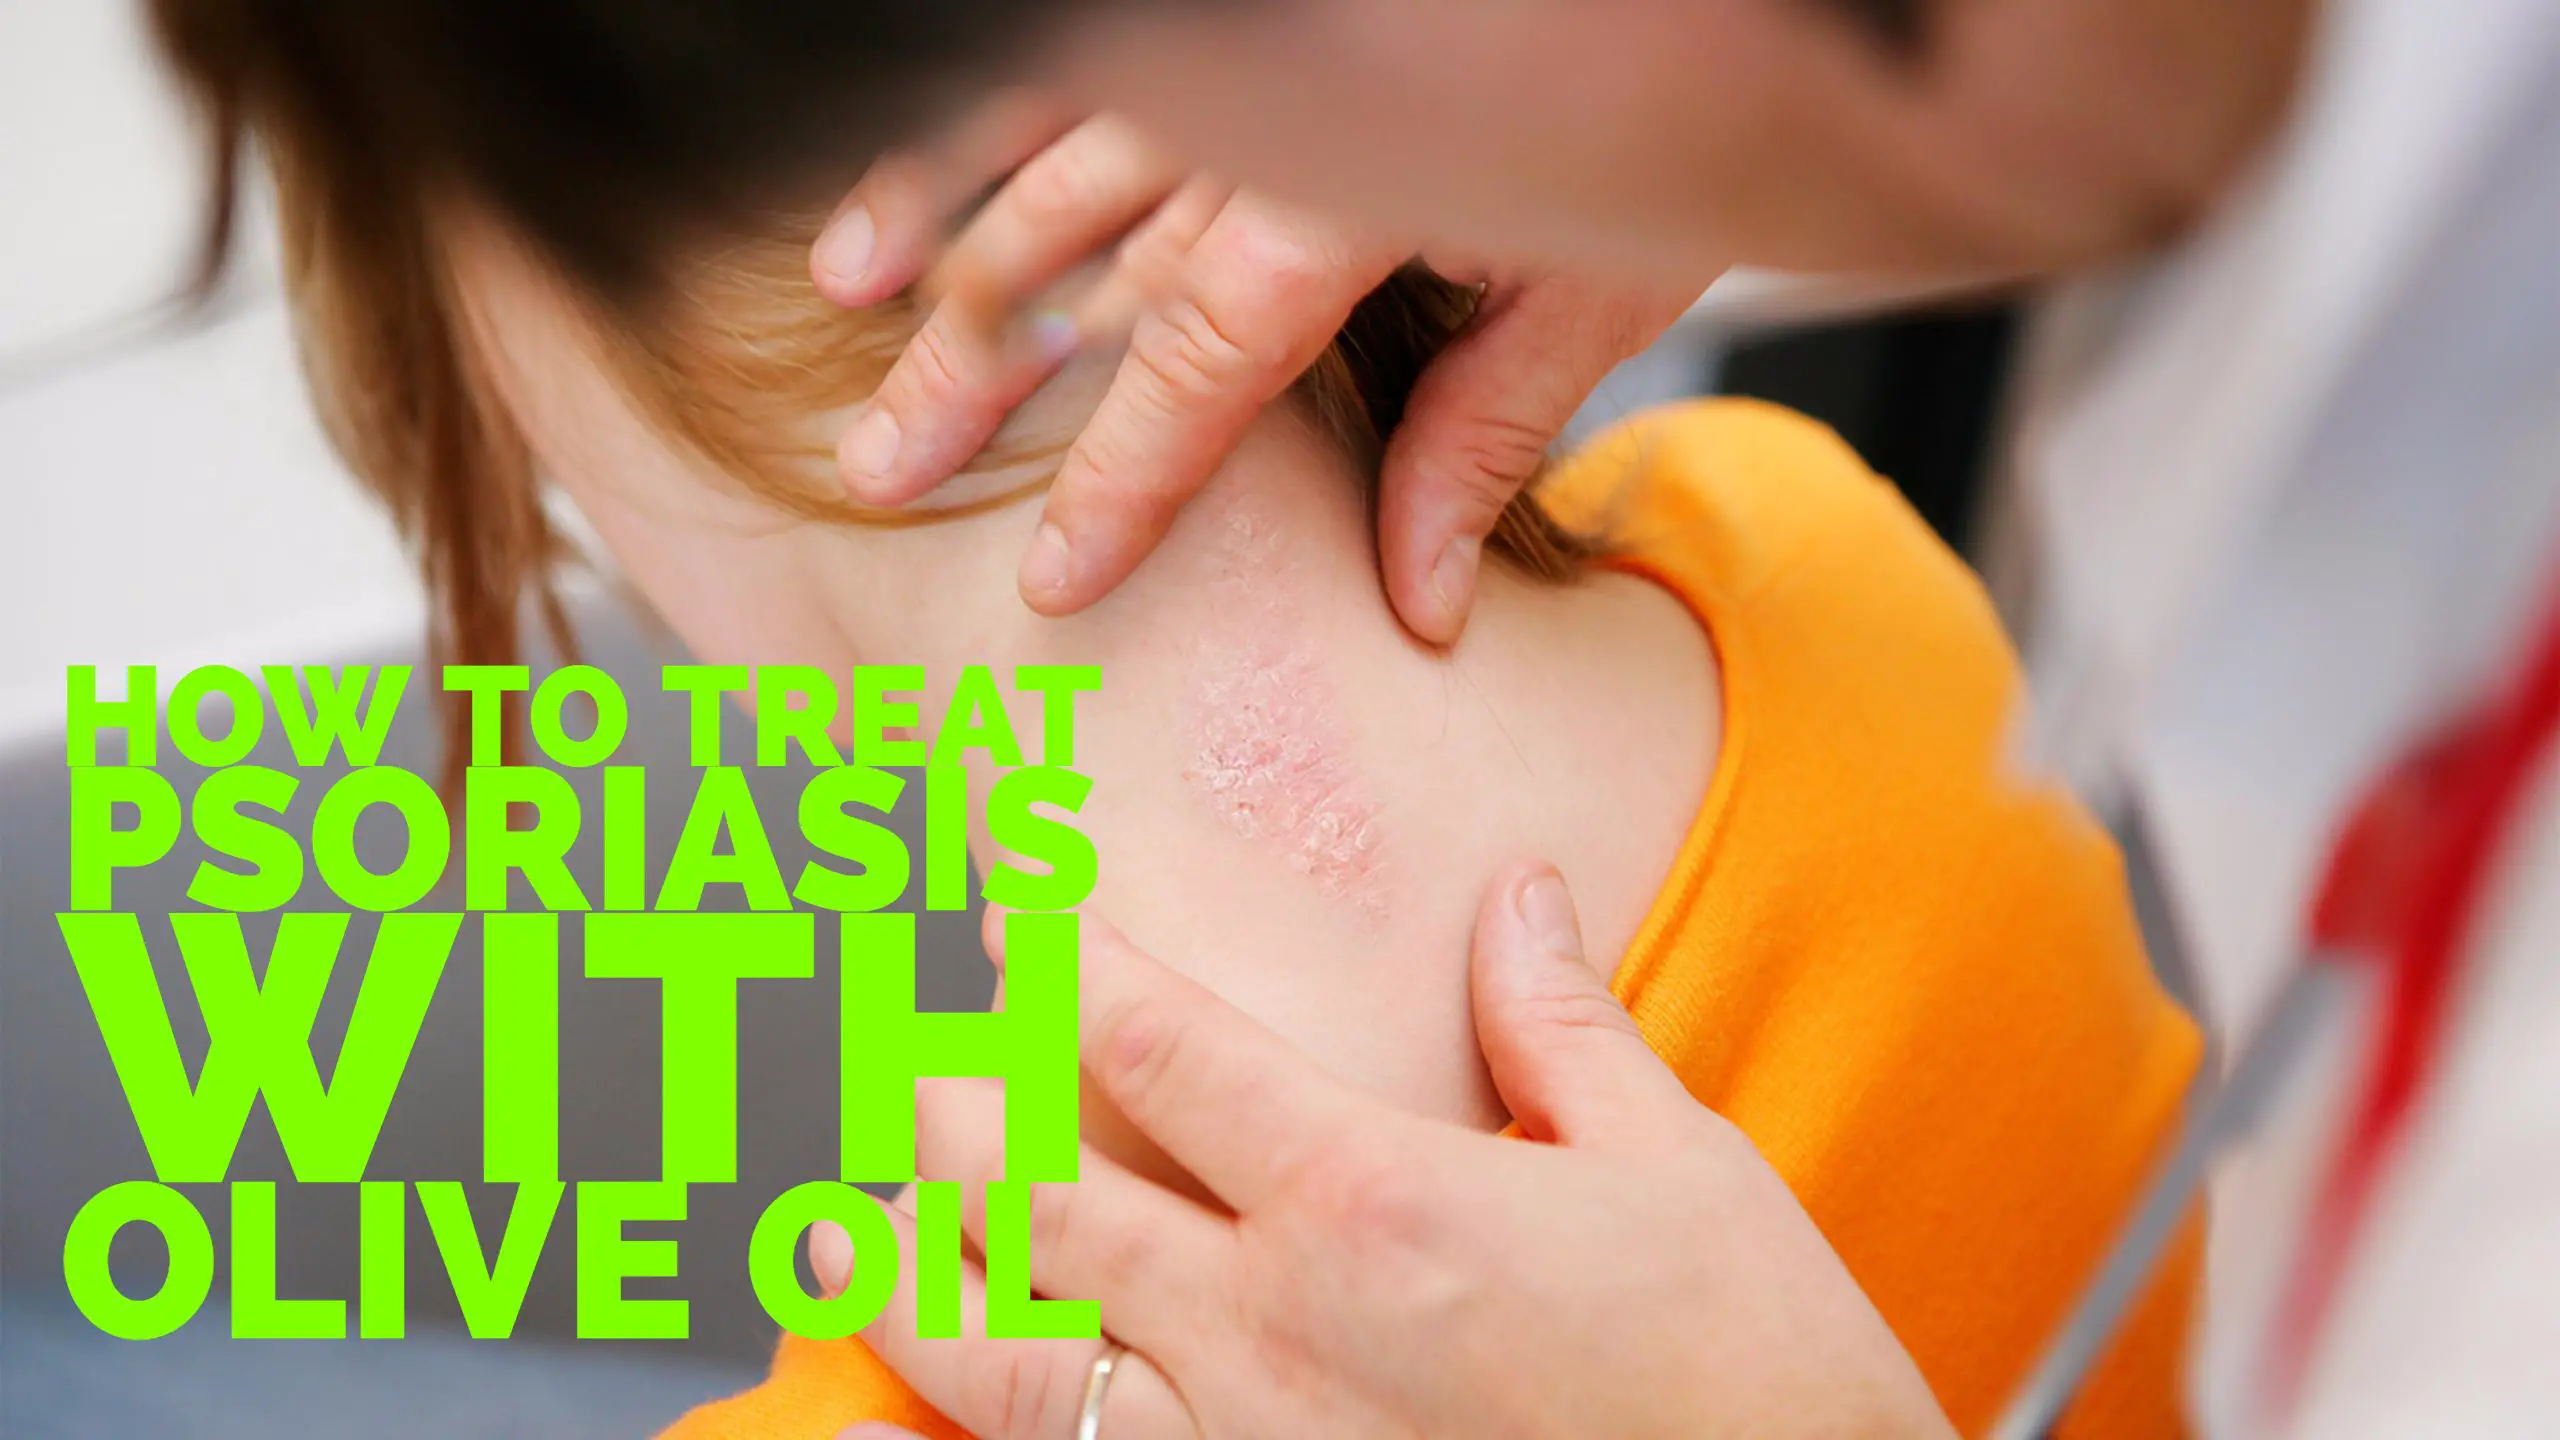 Olive Oil For Psoriasis